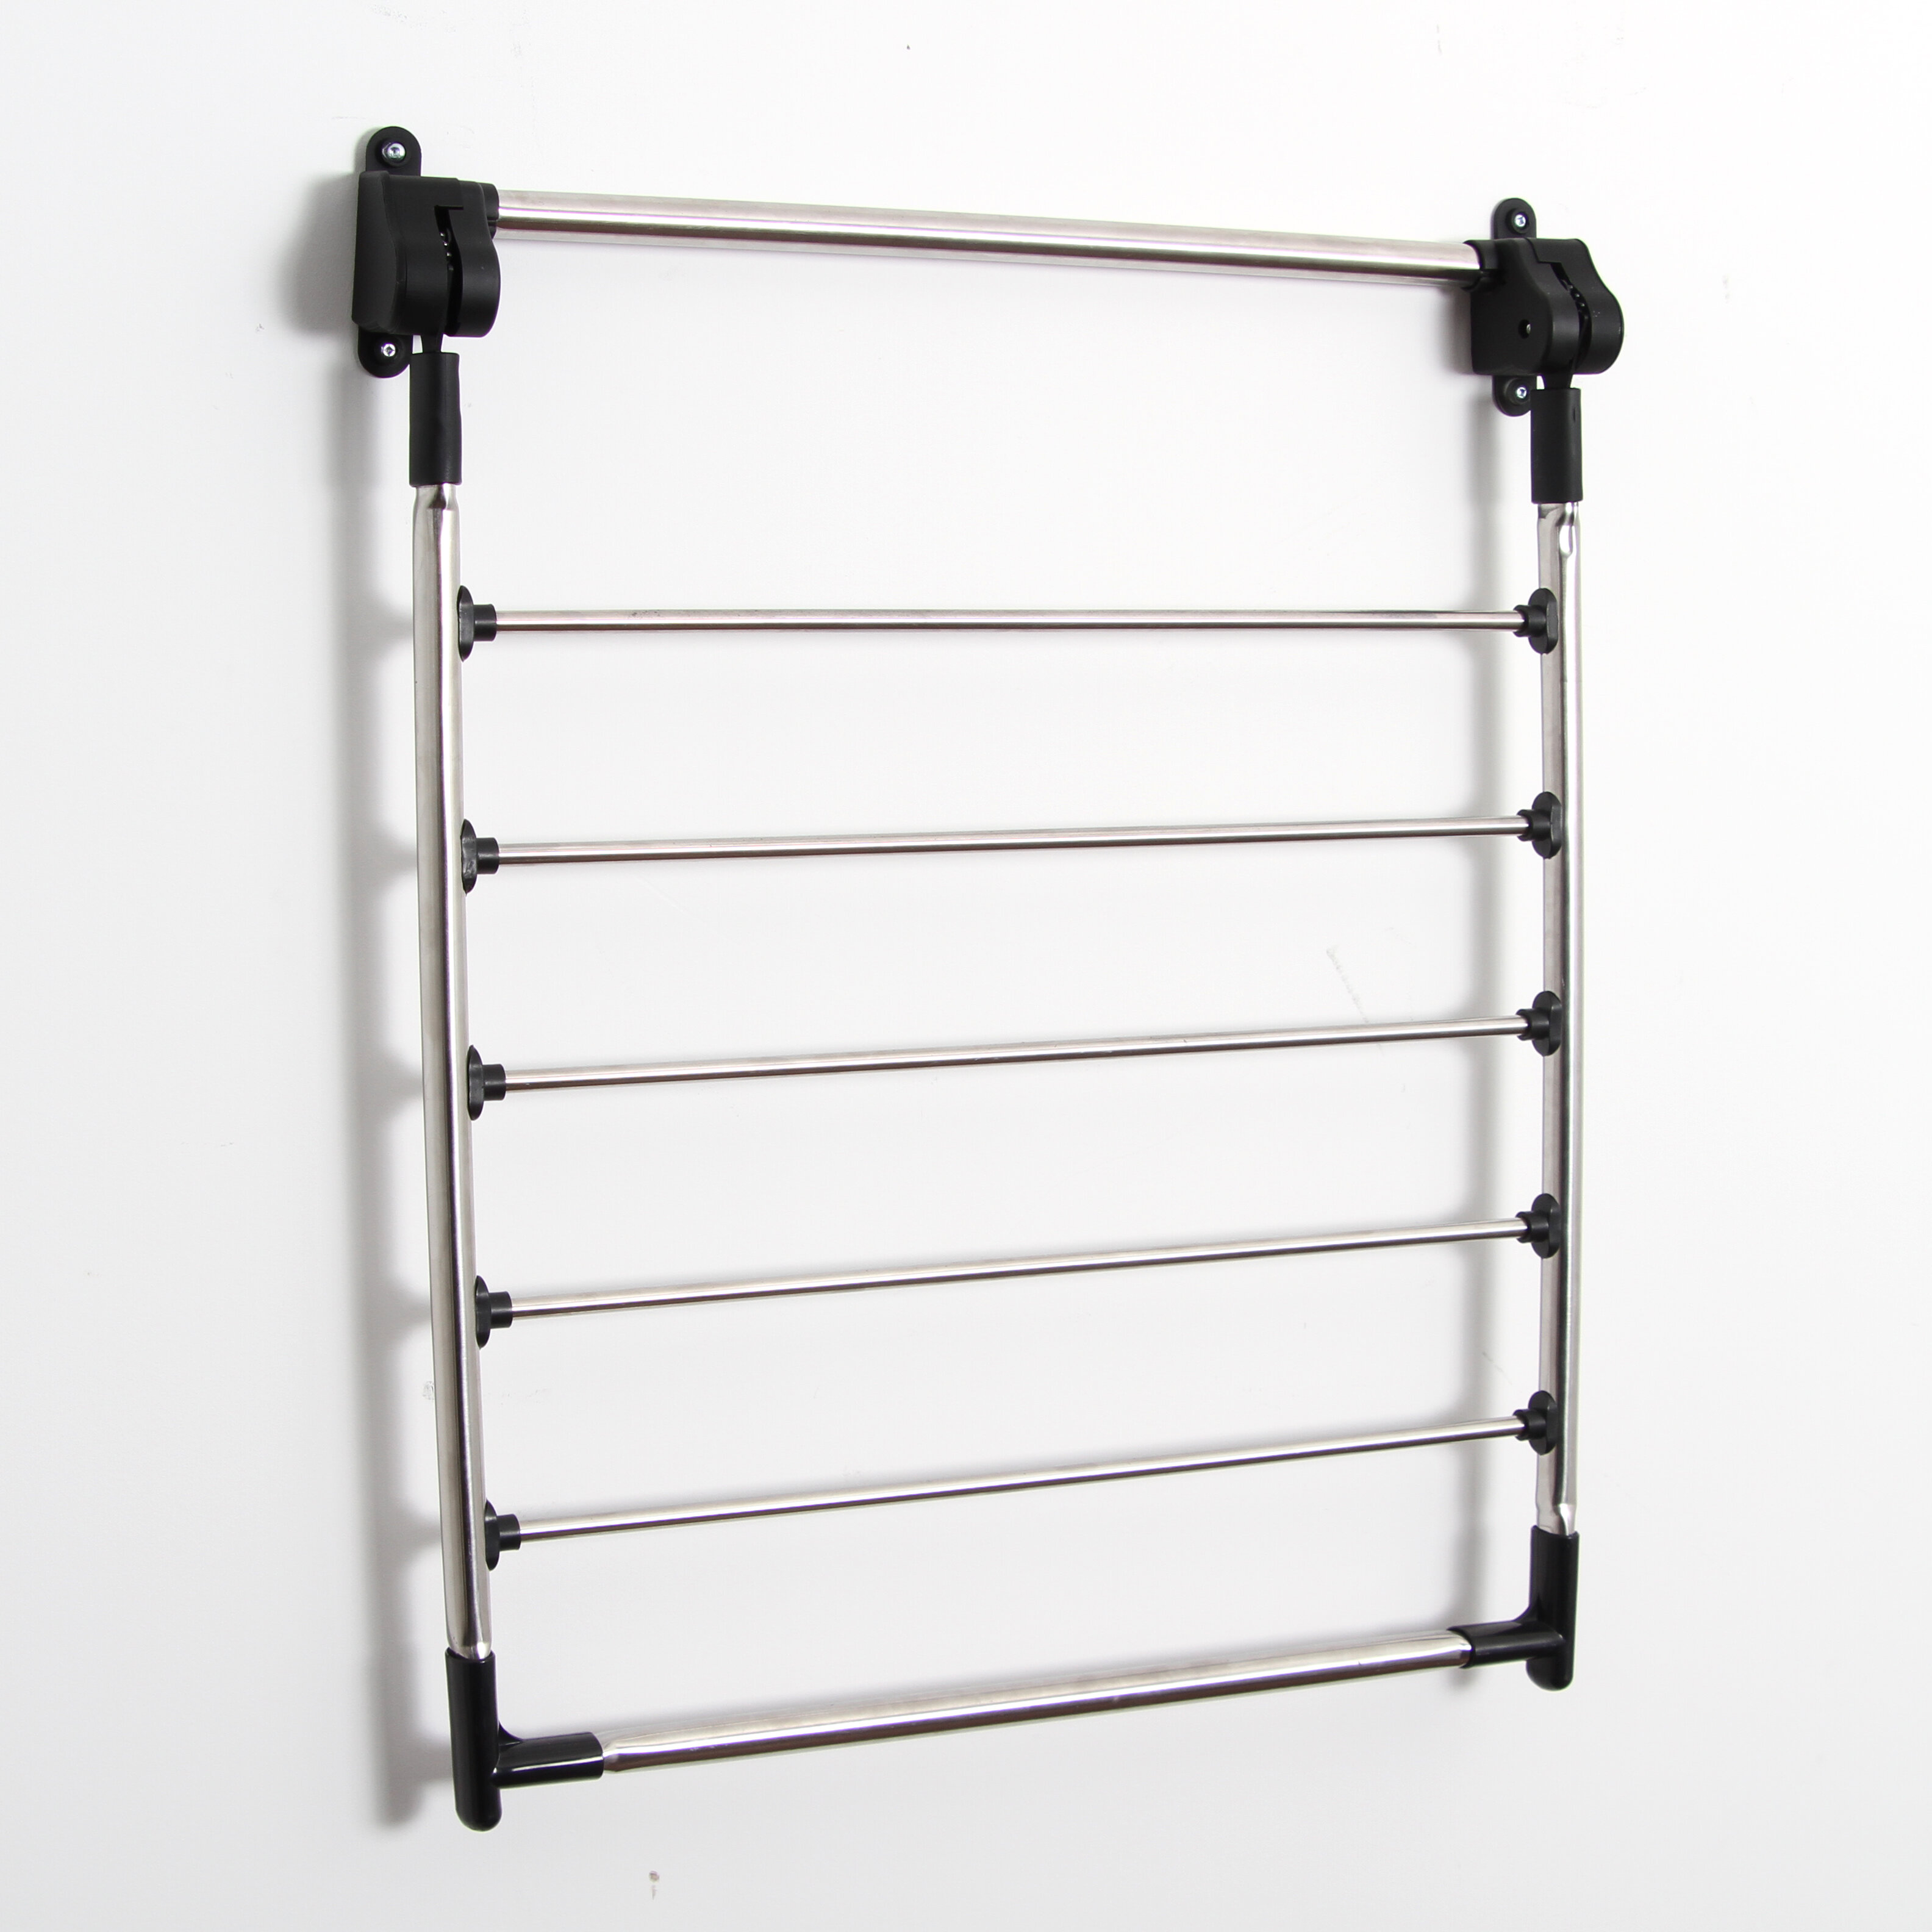 Retractable Clothes Rack Wall Mount Folding Drying Laundry Rack Hanger Organizer 